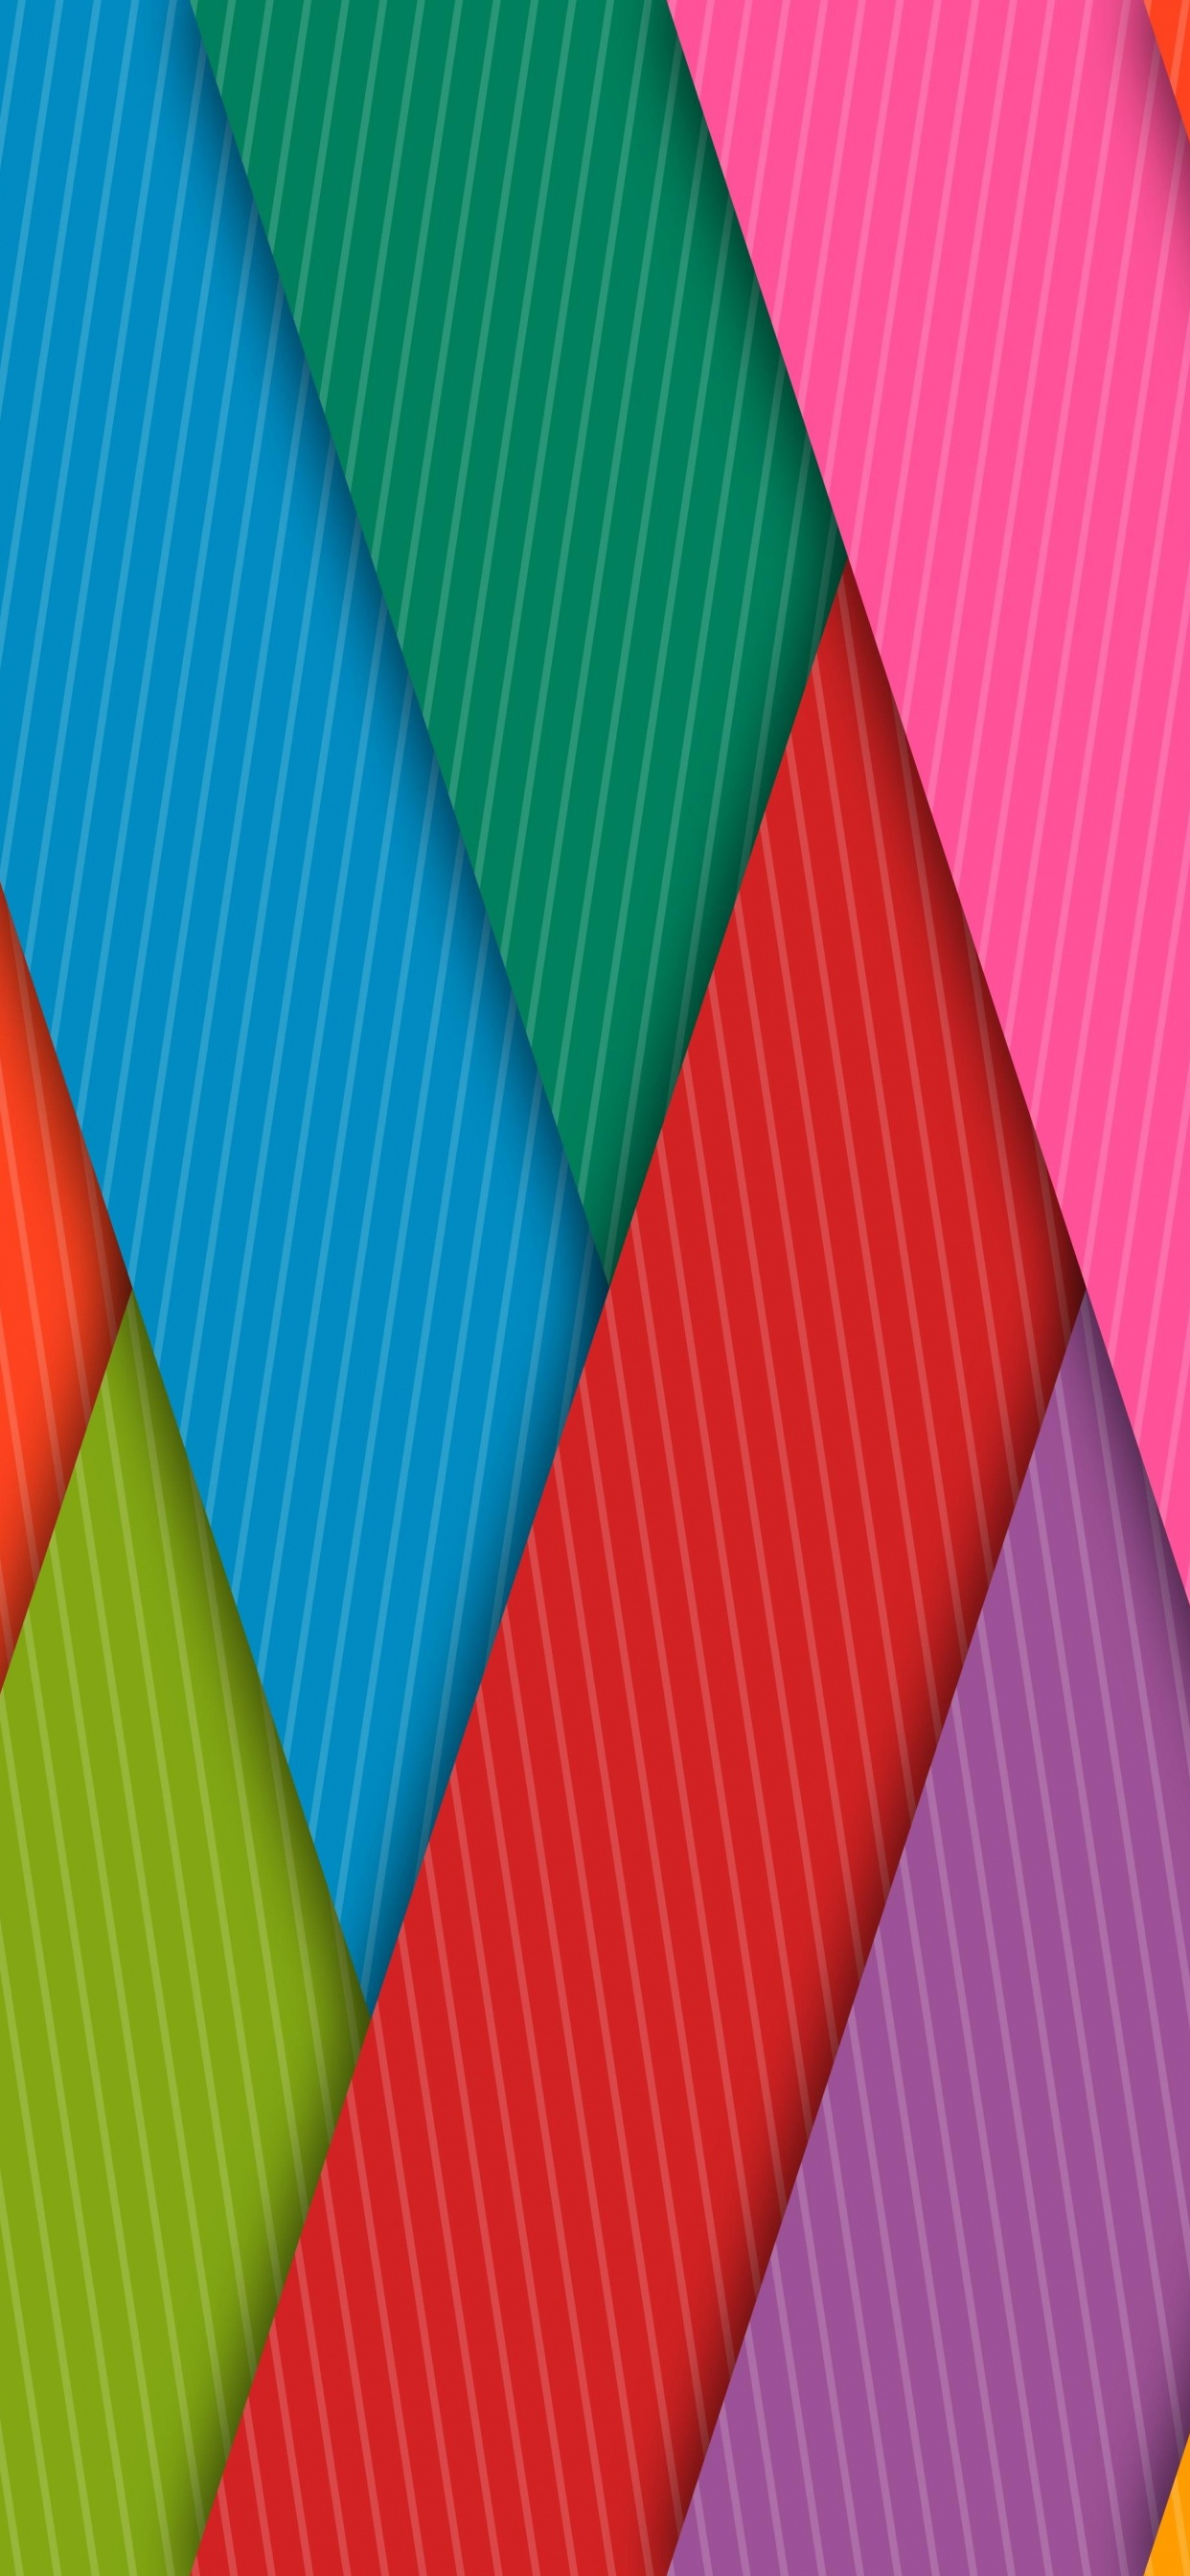 Red Blue and Green Striped Textile. Wallpaper in 1242x2688 Resolution